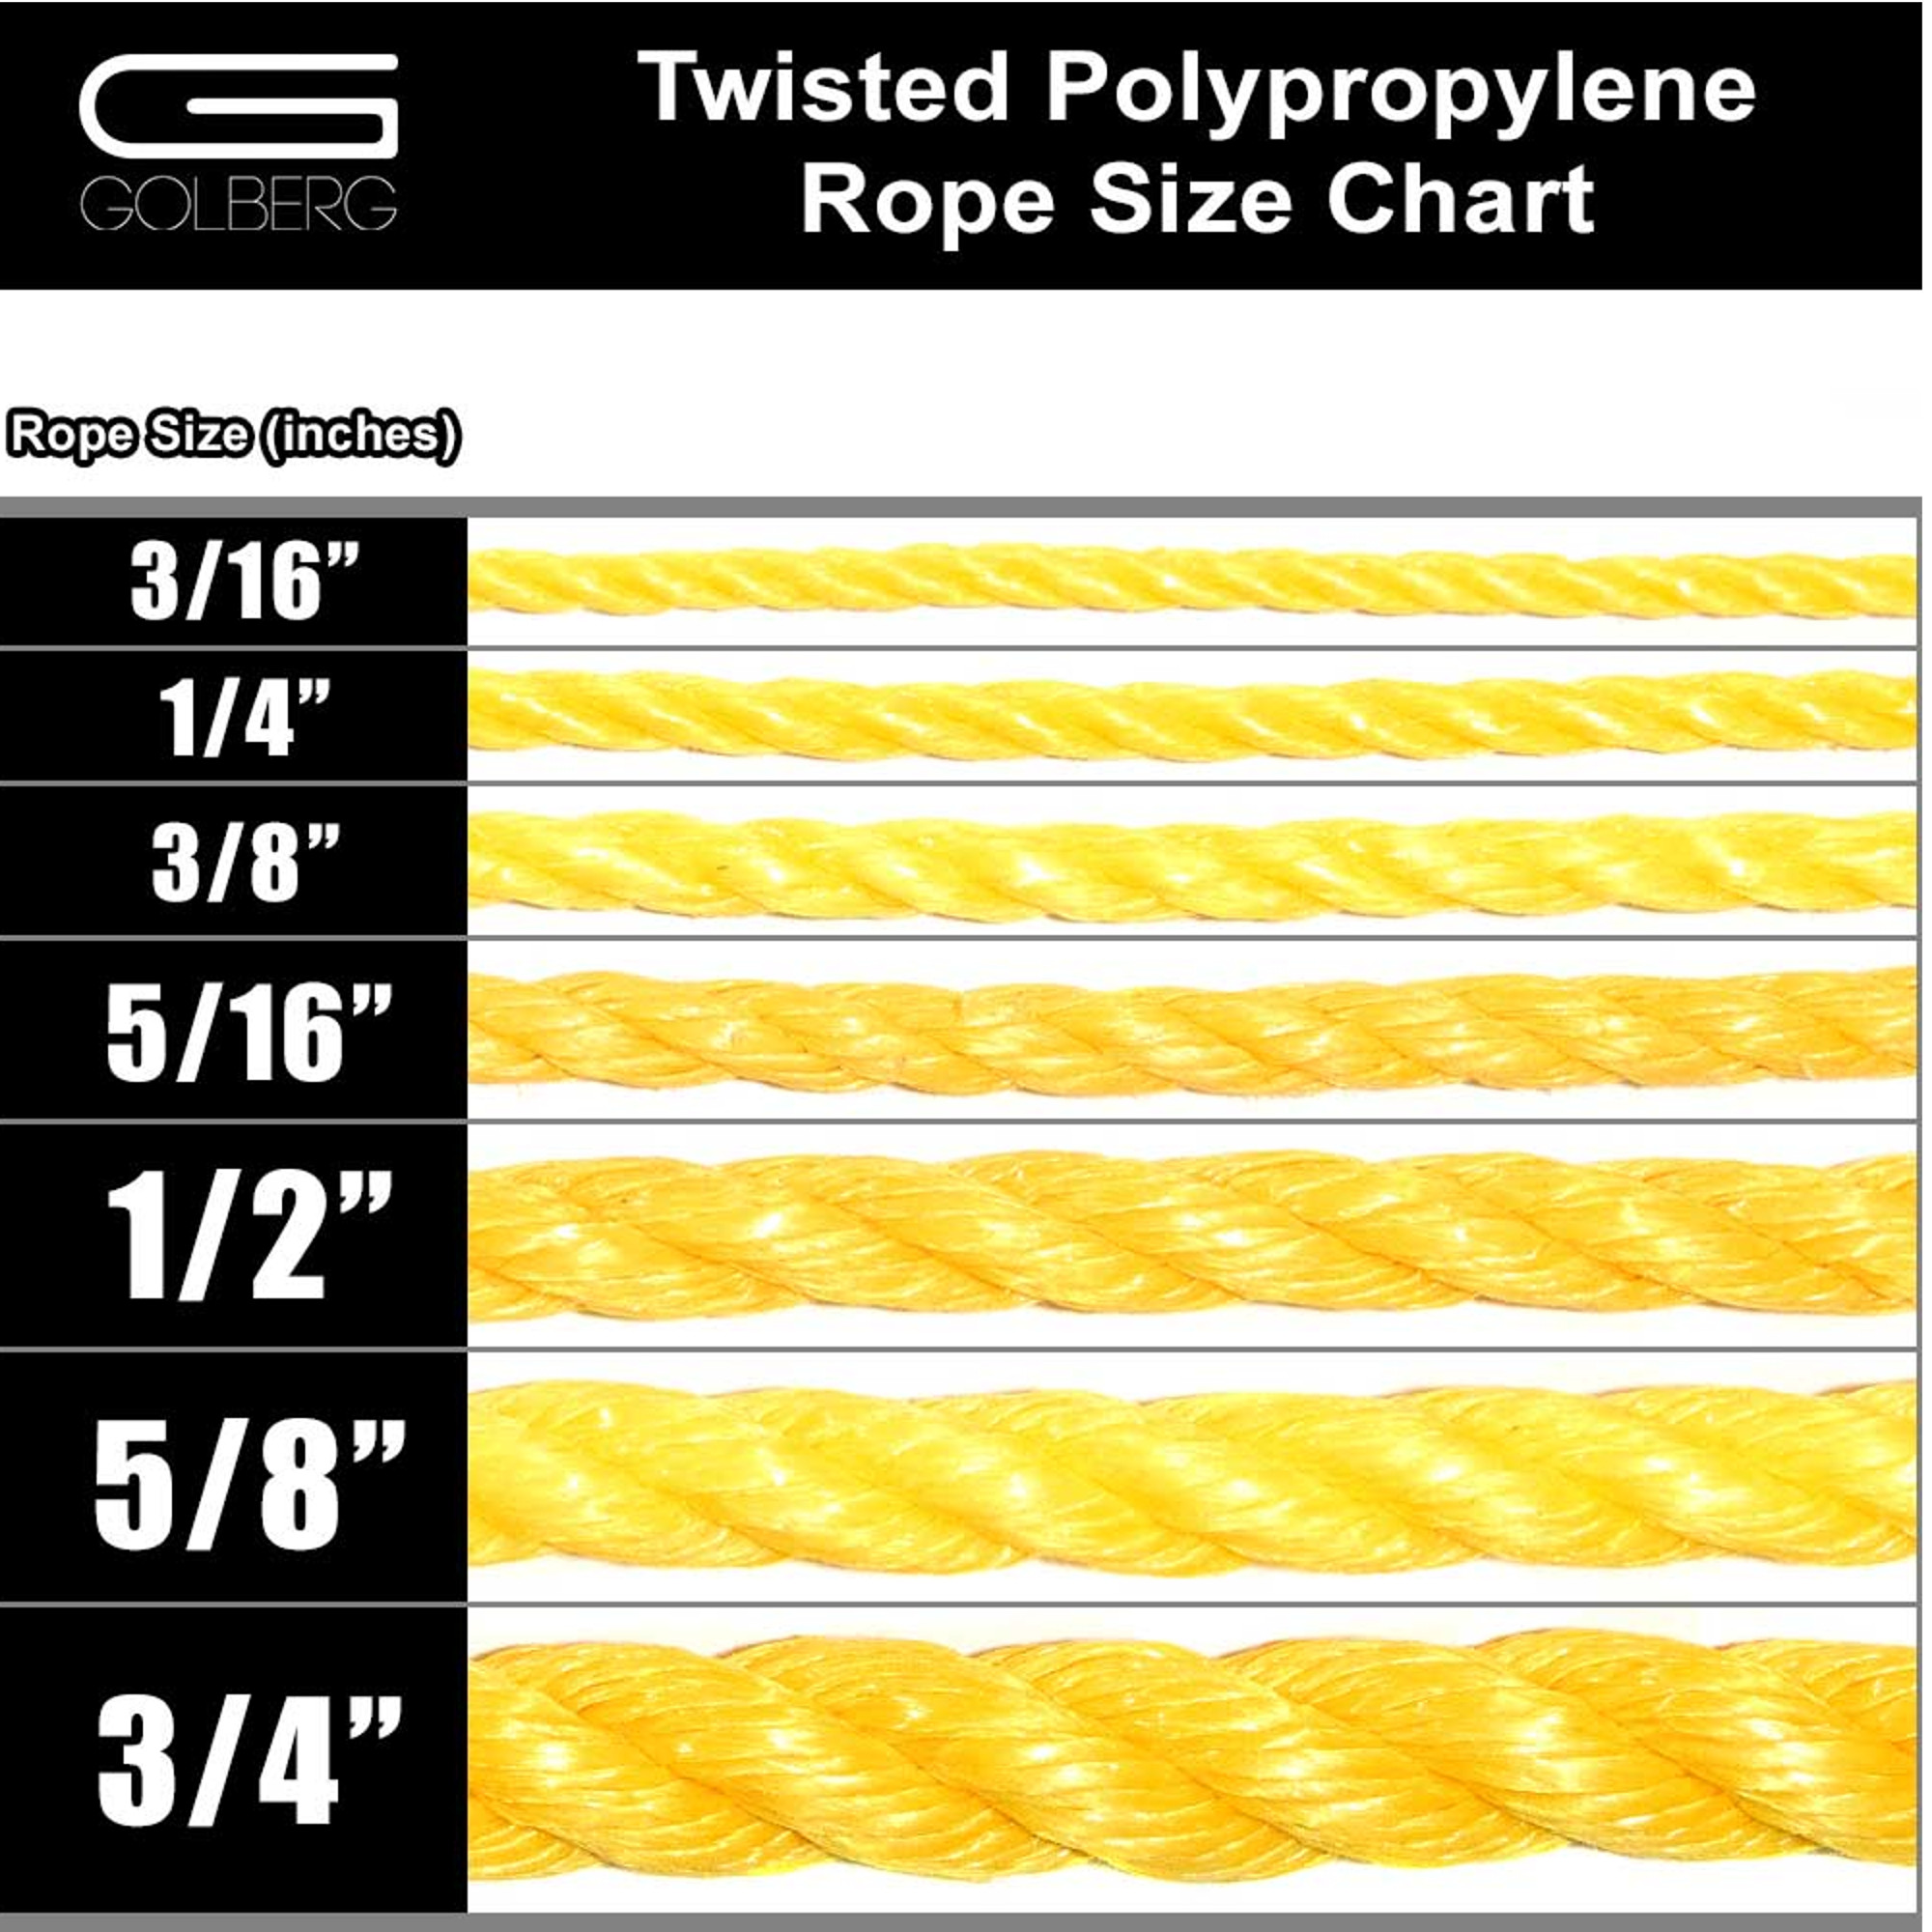 GOLBERG Twisted Polypropylene Rope 1/4", 5/16", 3/8", 1/2", 5/8", 3/4" Several Colors - image 3 of 3